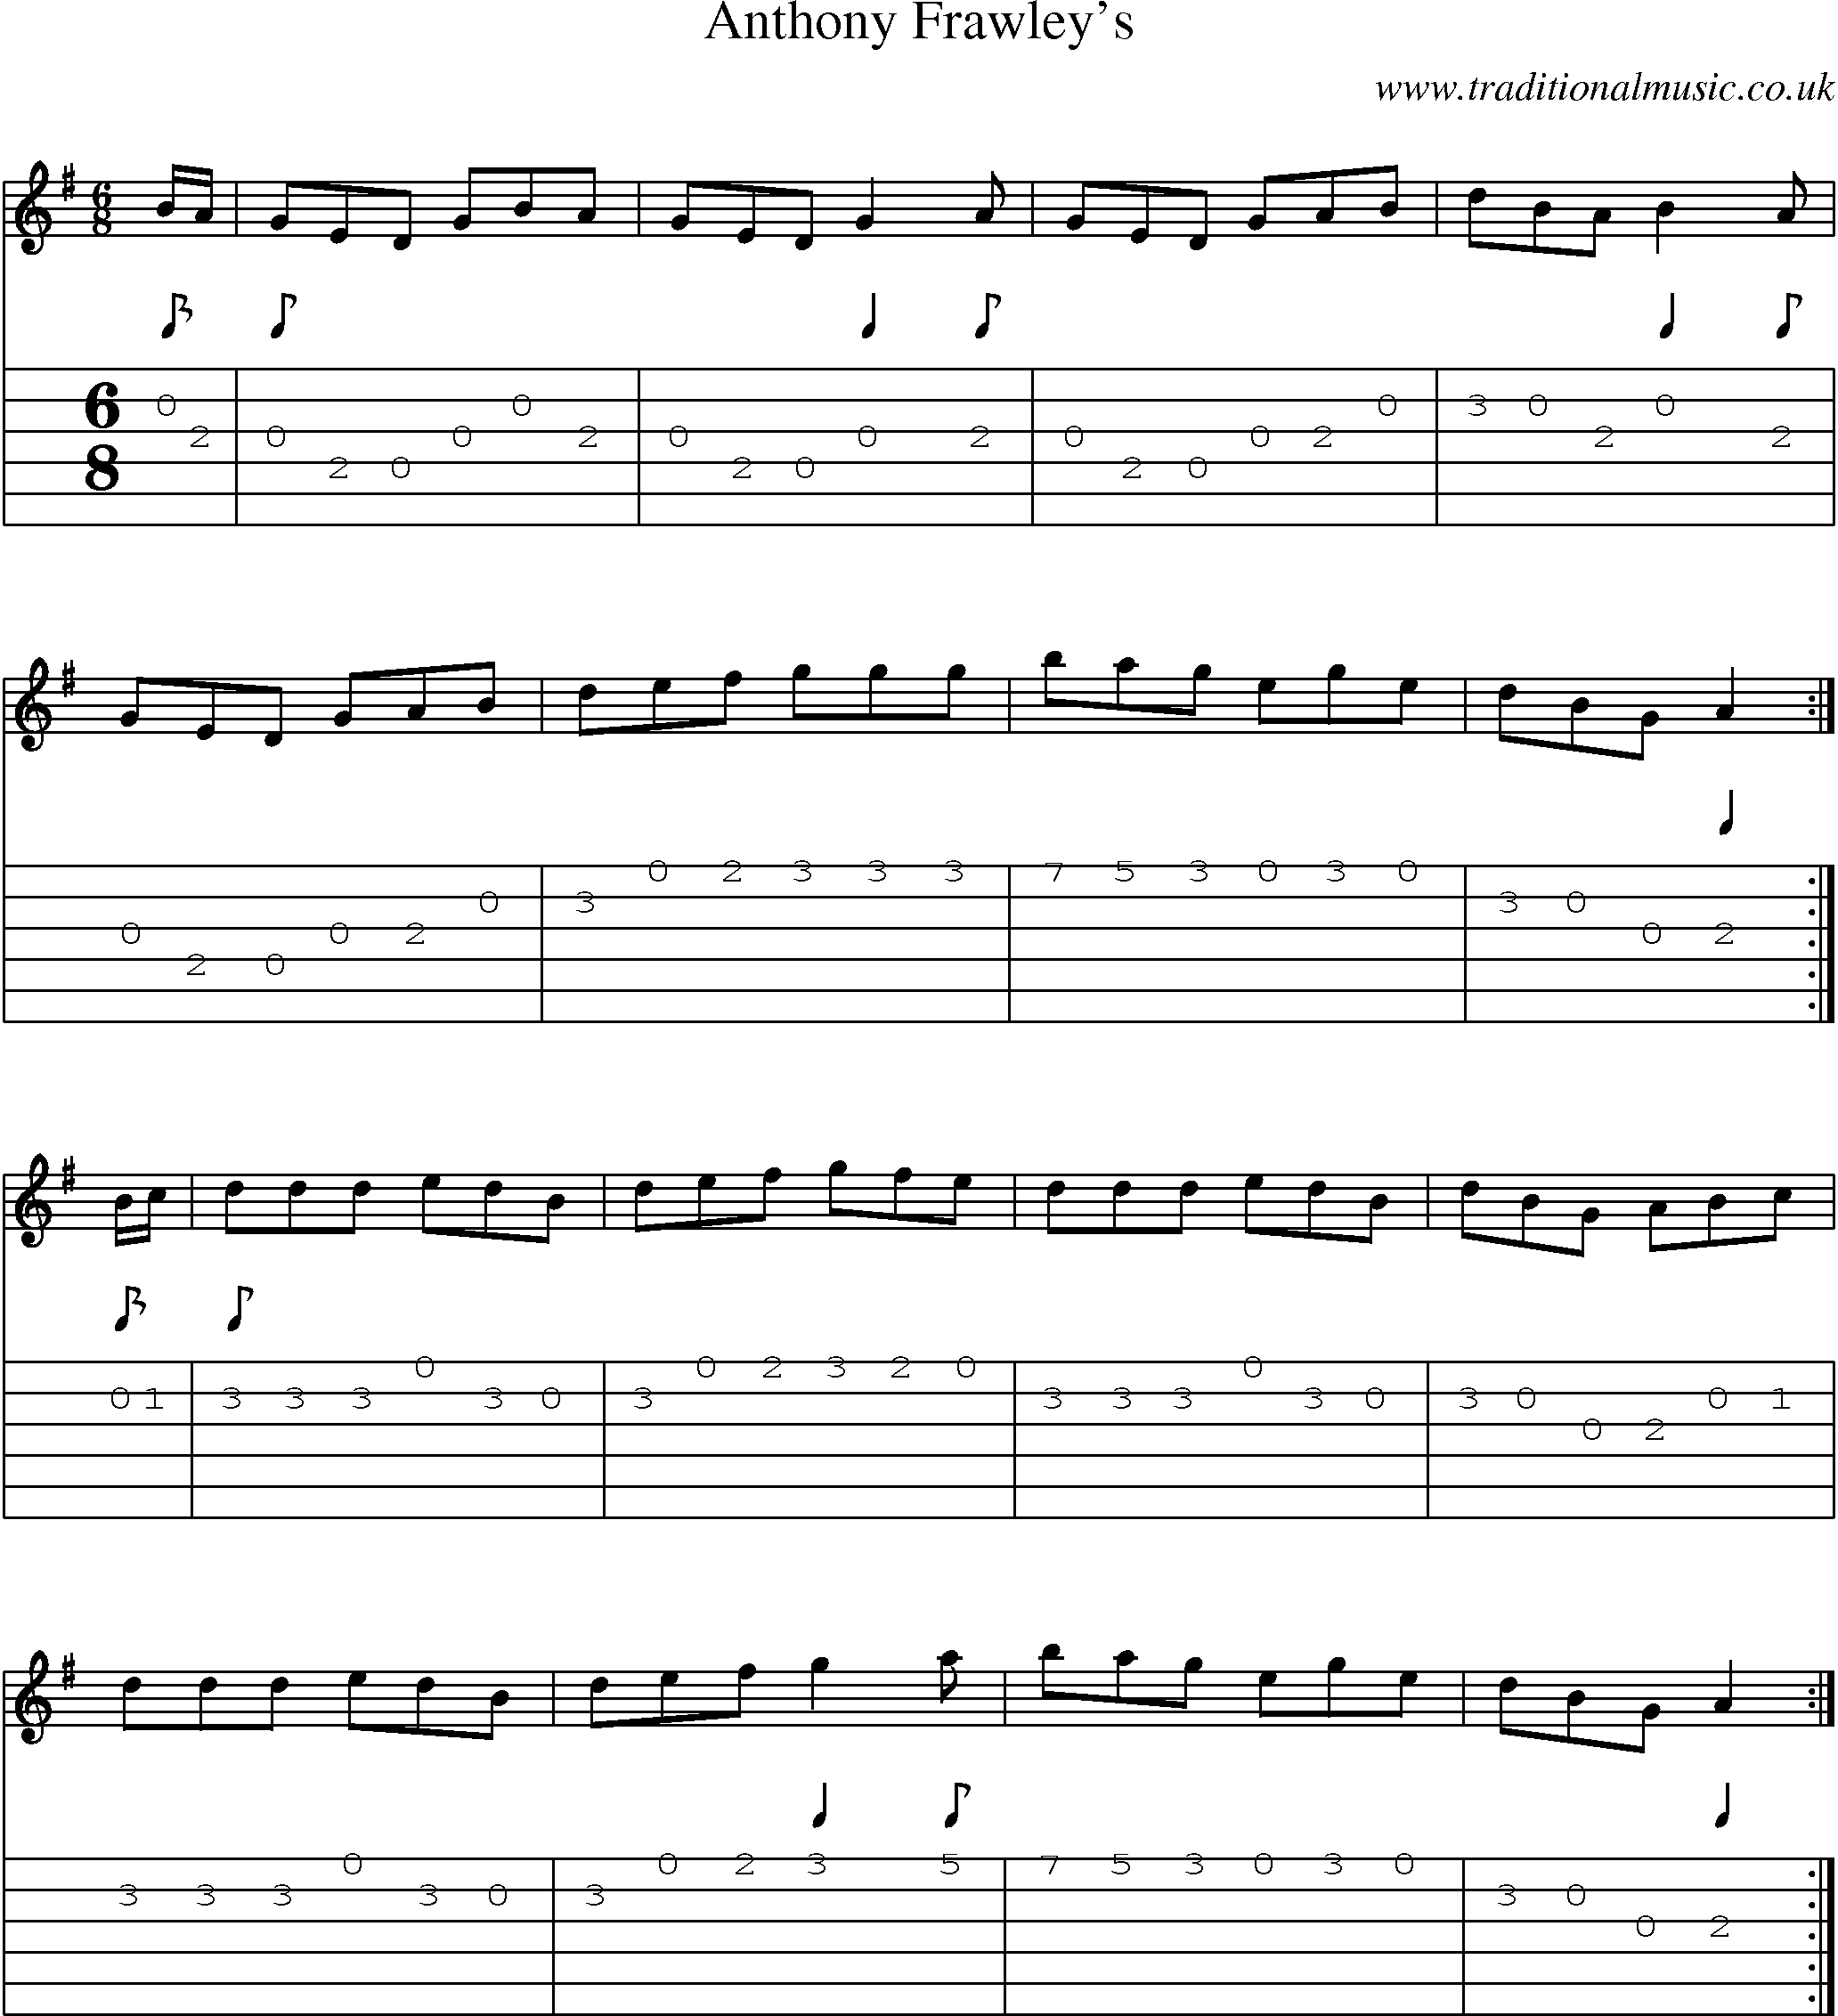 Music Score and Guitar Tabs for Anthony Frawleys